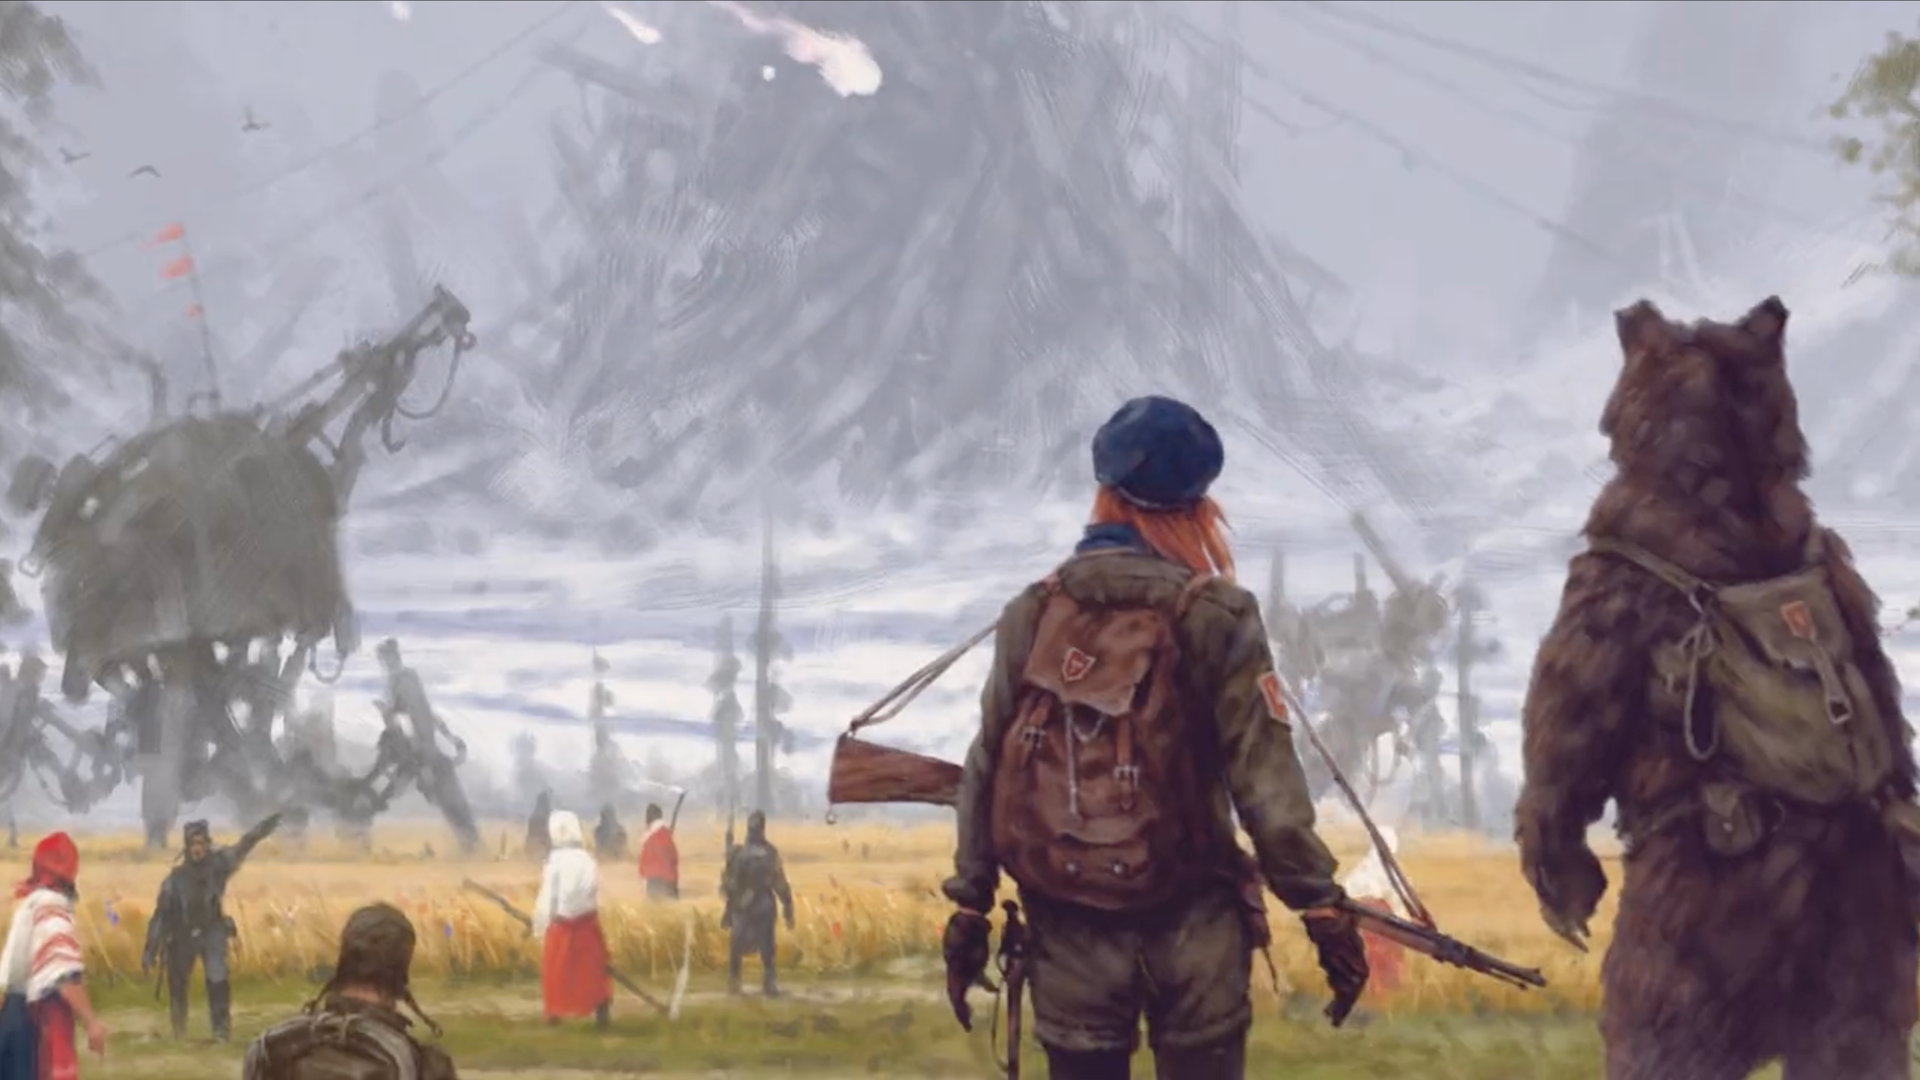 Screenshot from the teaser trailer for Expeditions from Stonemaier Games.